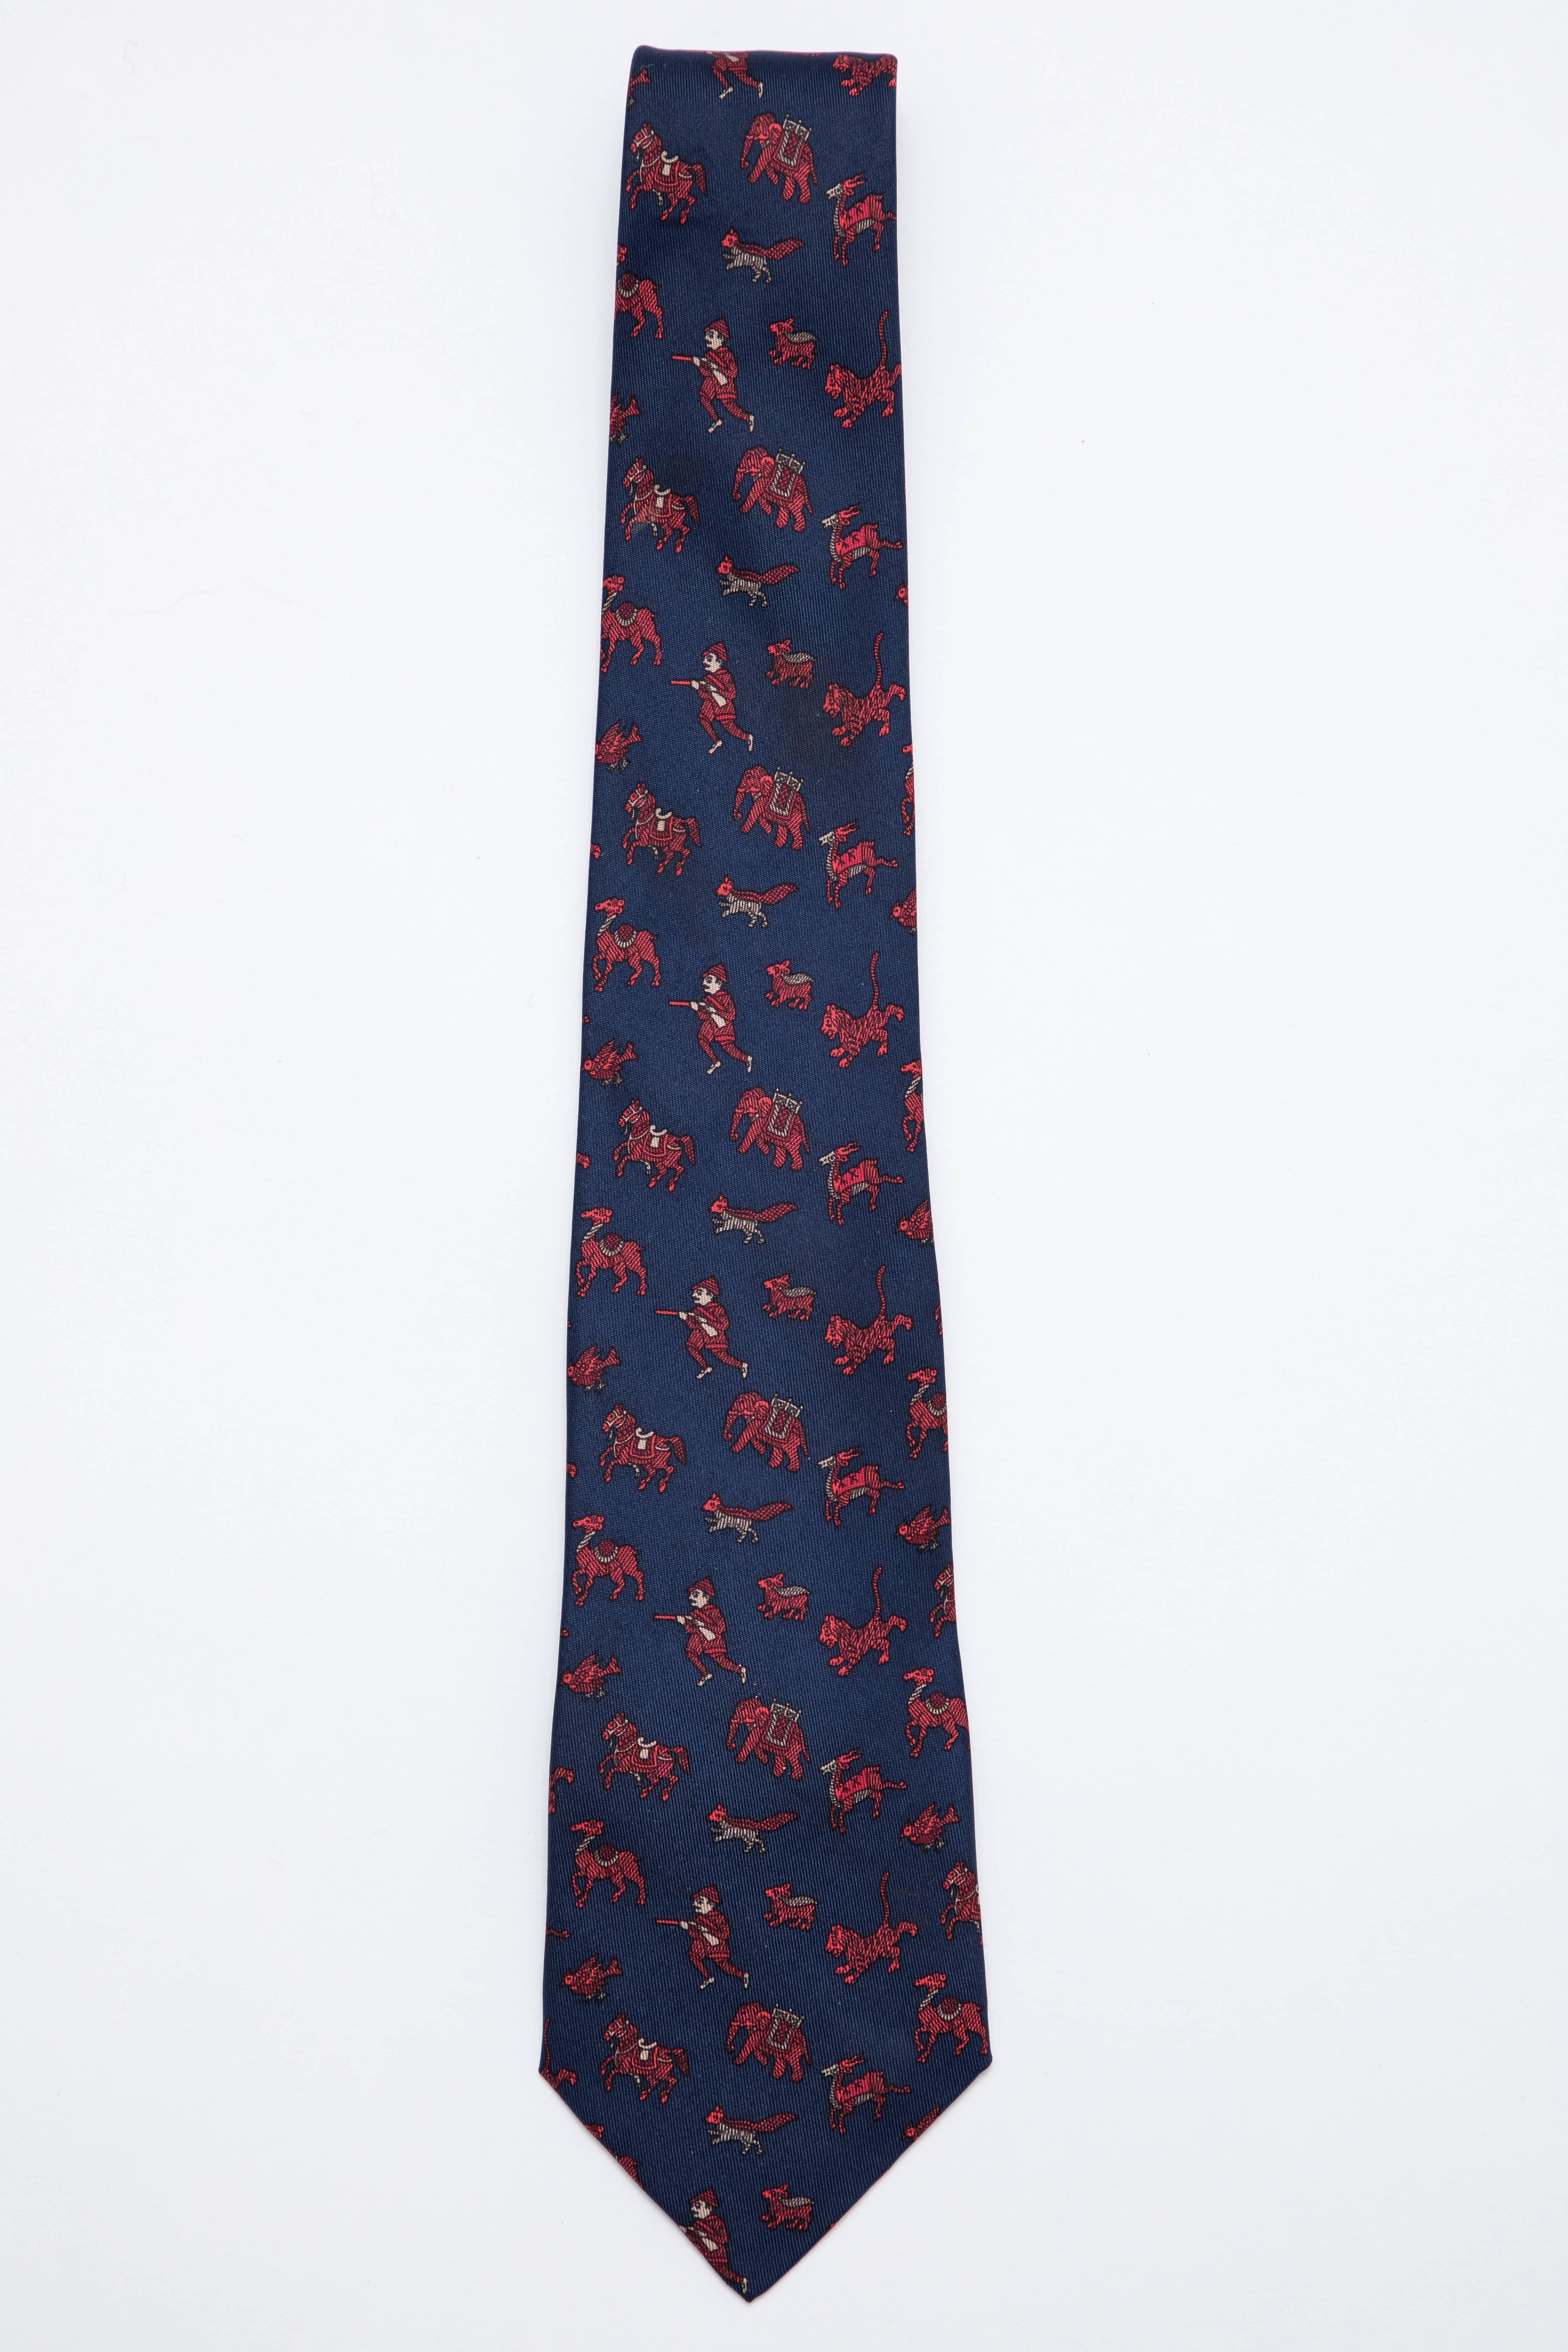  Hermès, Circa 1990's men's navy blue silk twill tie with red hunting motif throughout.

Length: 57